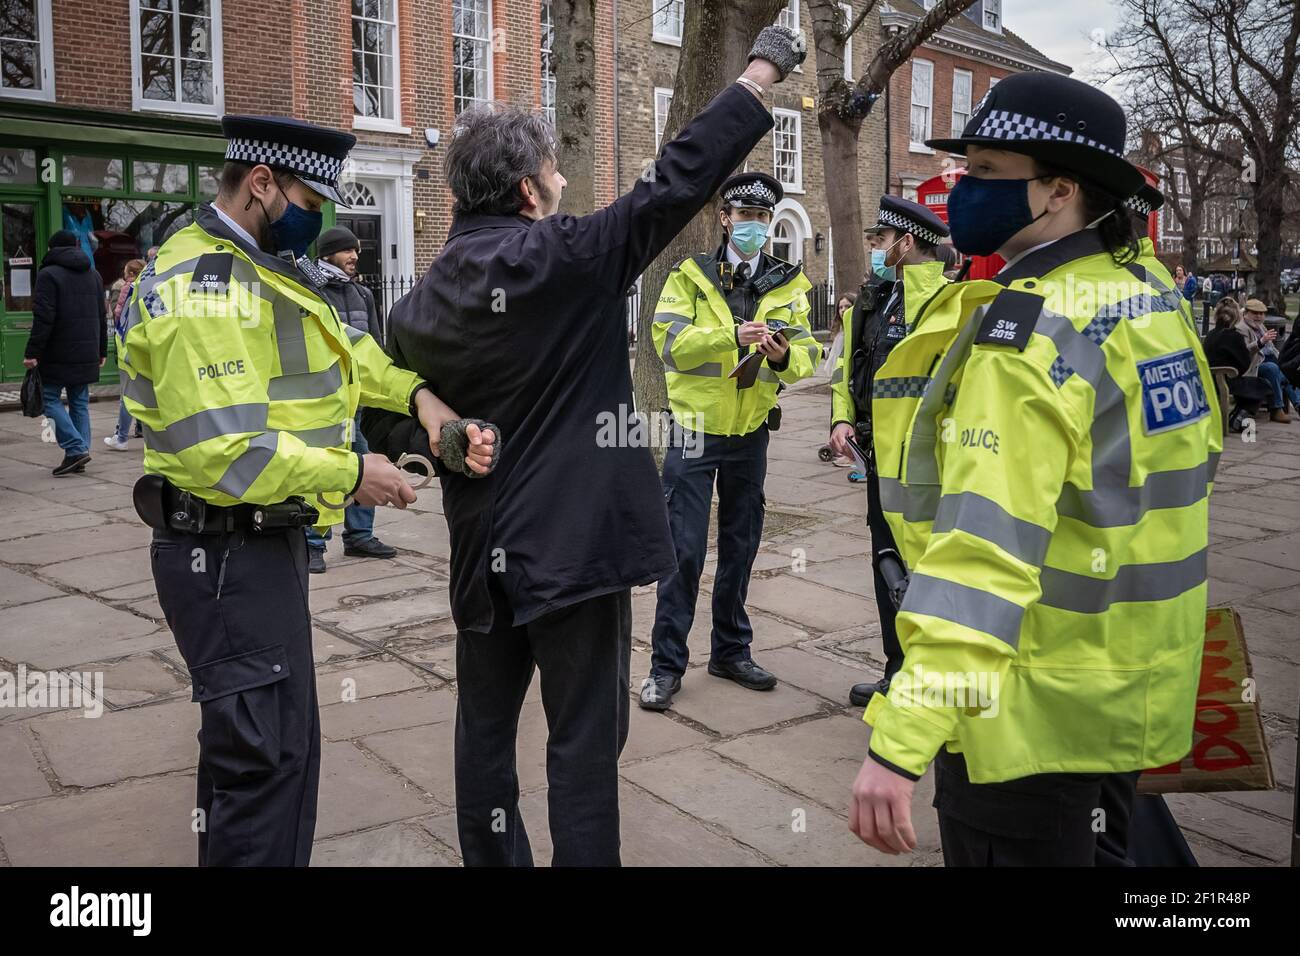 Coronavirus: Police break up and make arrests during an attempted anti-lockdown event of 20-30 protesters on Richmond Green in south east London, UK. Stock Photo